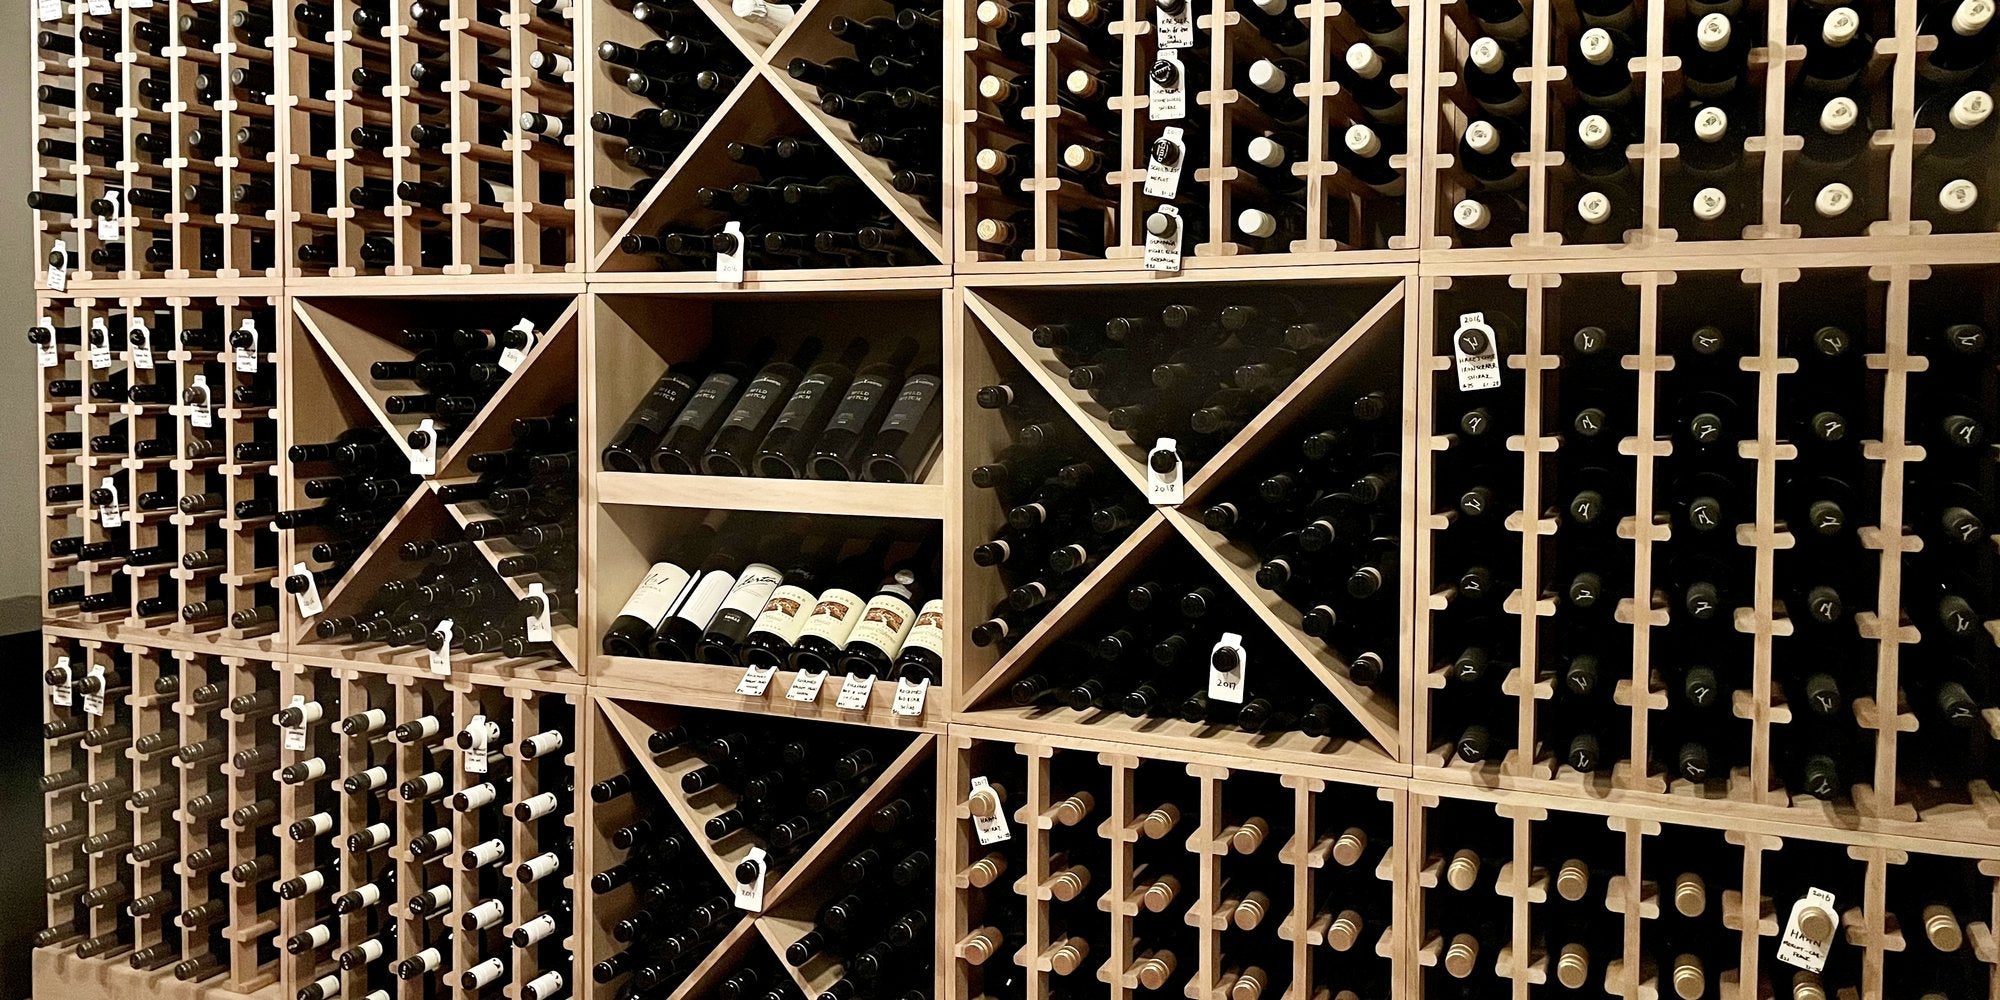 Attention Wine Lovers: Here are the 6 Simple Steps to Building a Wine Wall | Wine Stash